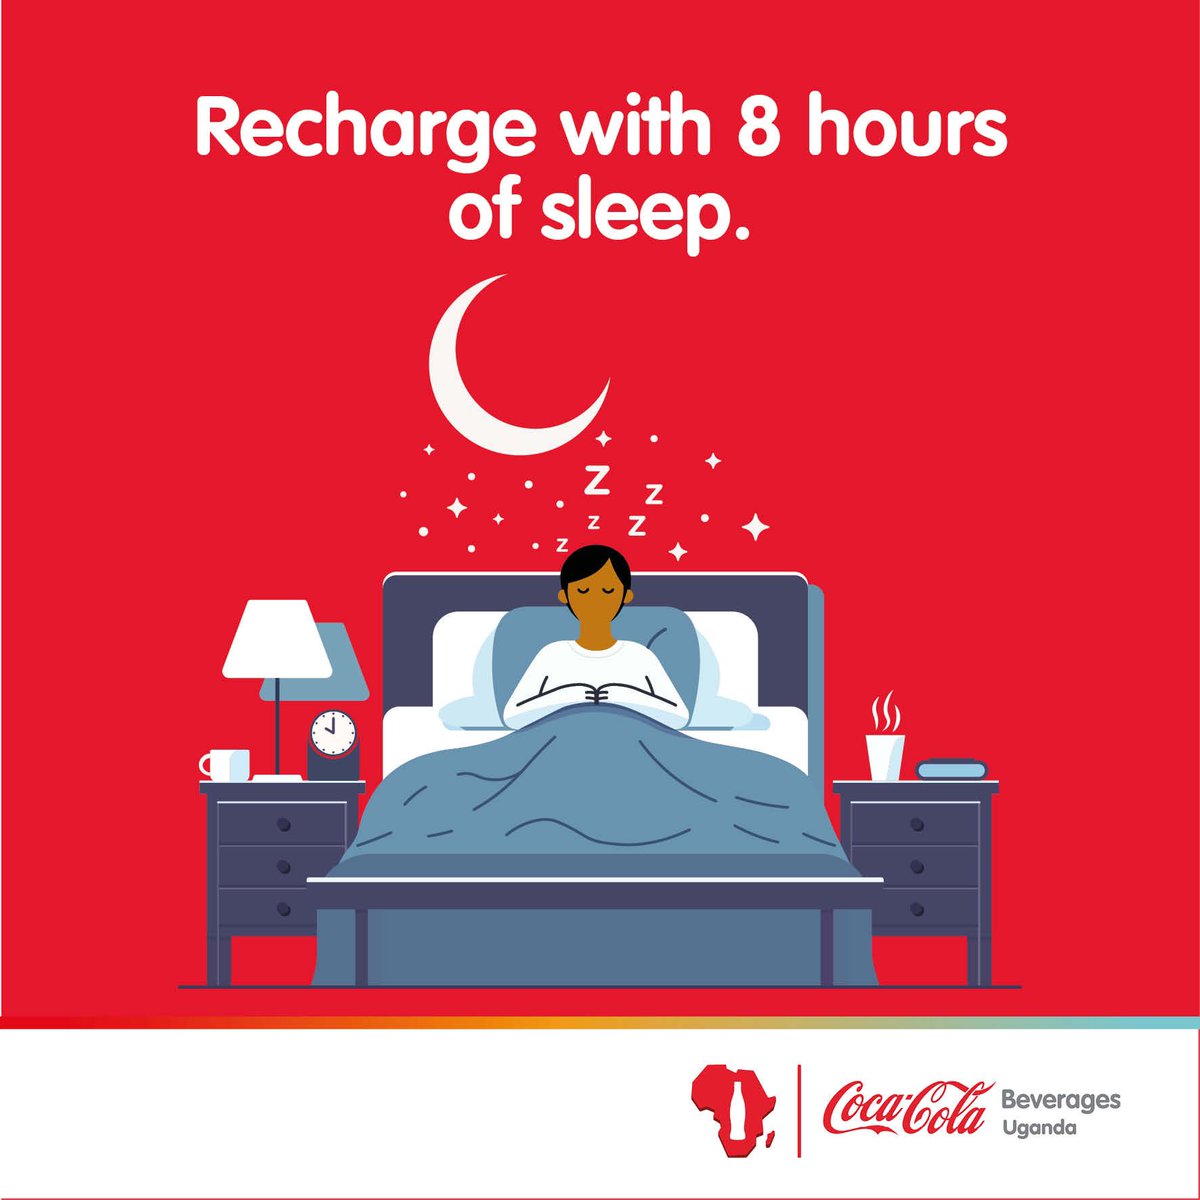 How many hours of sleep are you really getting? Aim for 7-8 hours of quality rest each night to feel your best. Sleep isn't a luxury, it's a necessity! Invest in your well-being - prioritize sleep!

#WellnessWednesday
#RefreshUG
#CCBU